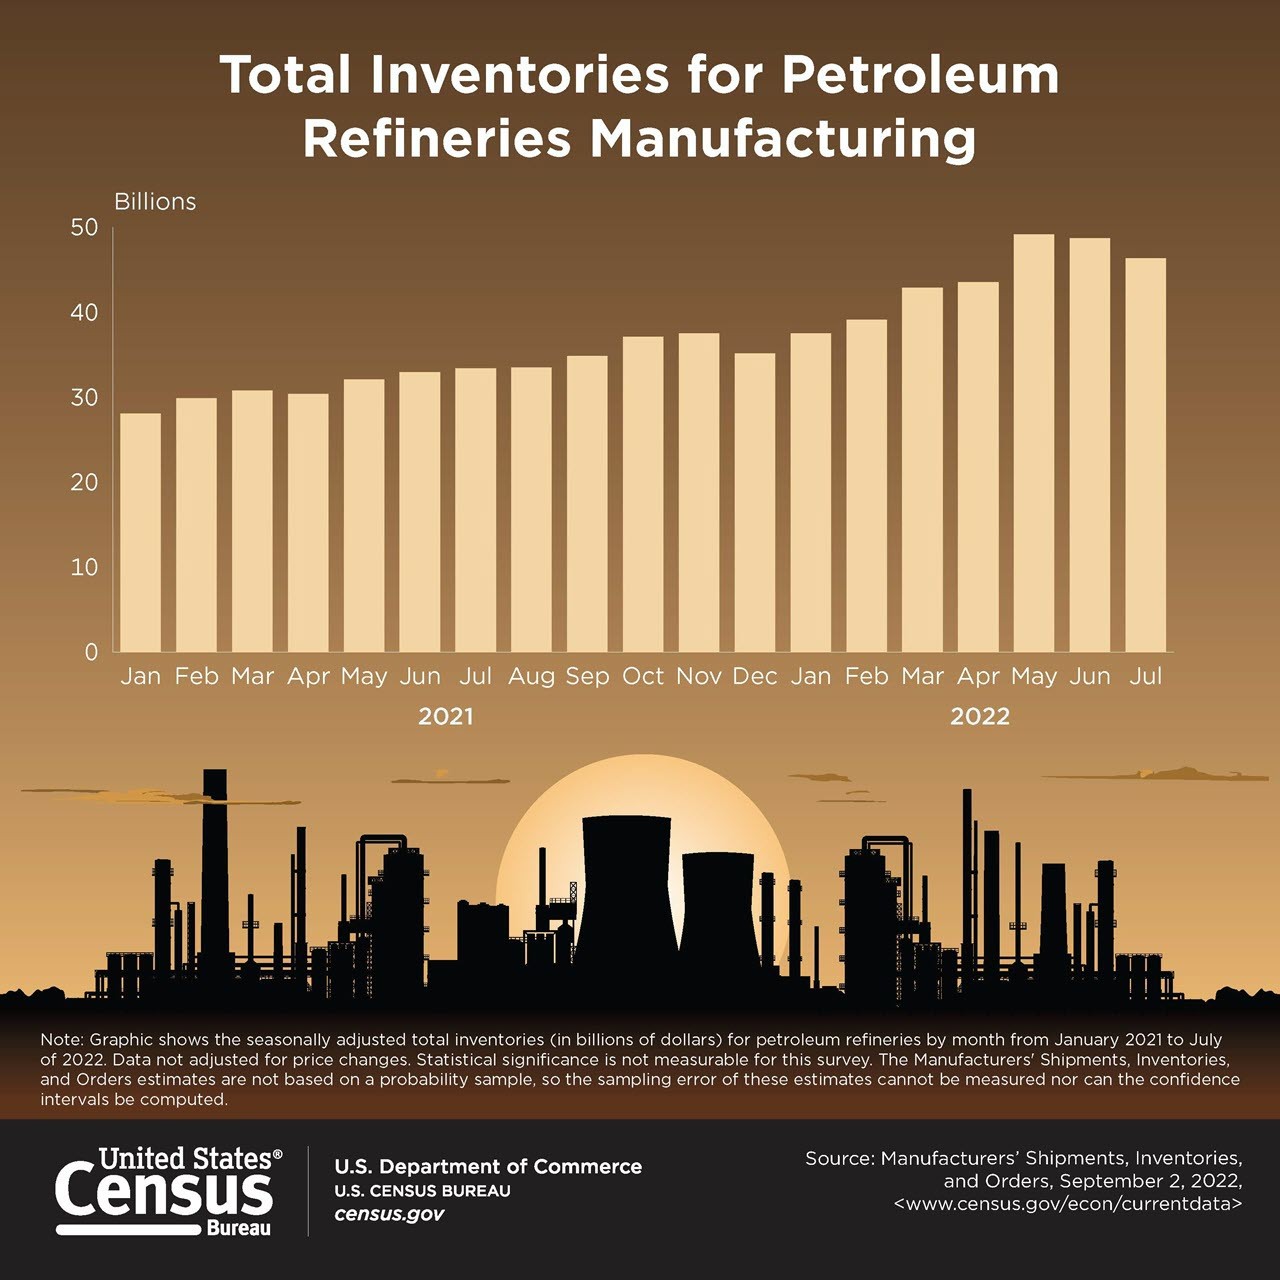 Total Inventories for Petroleum Refineries Manufacturing